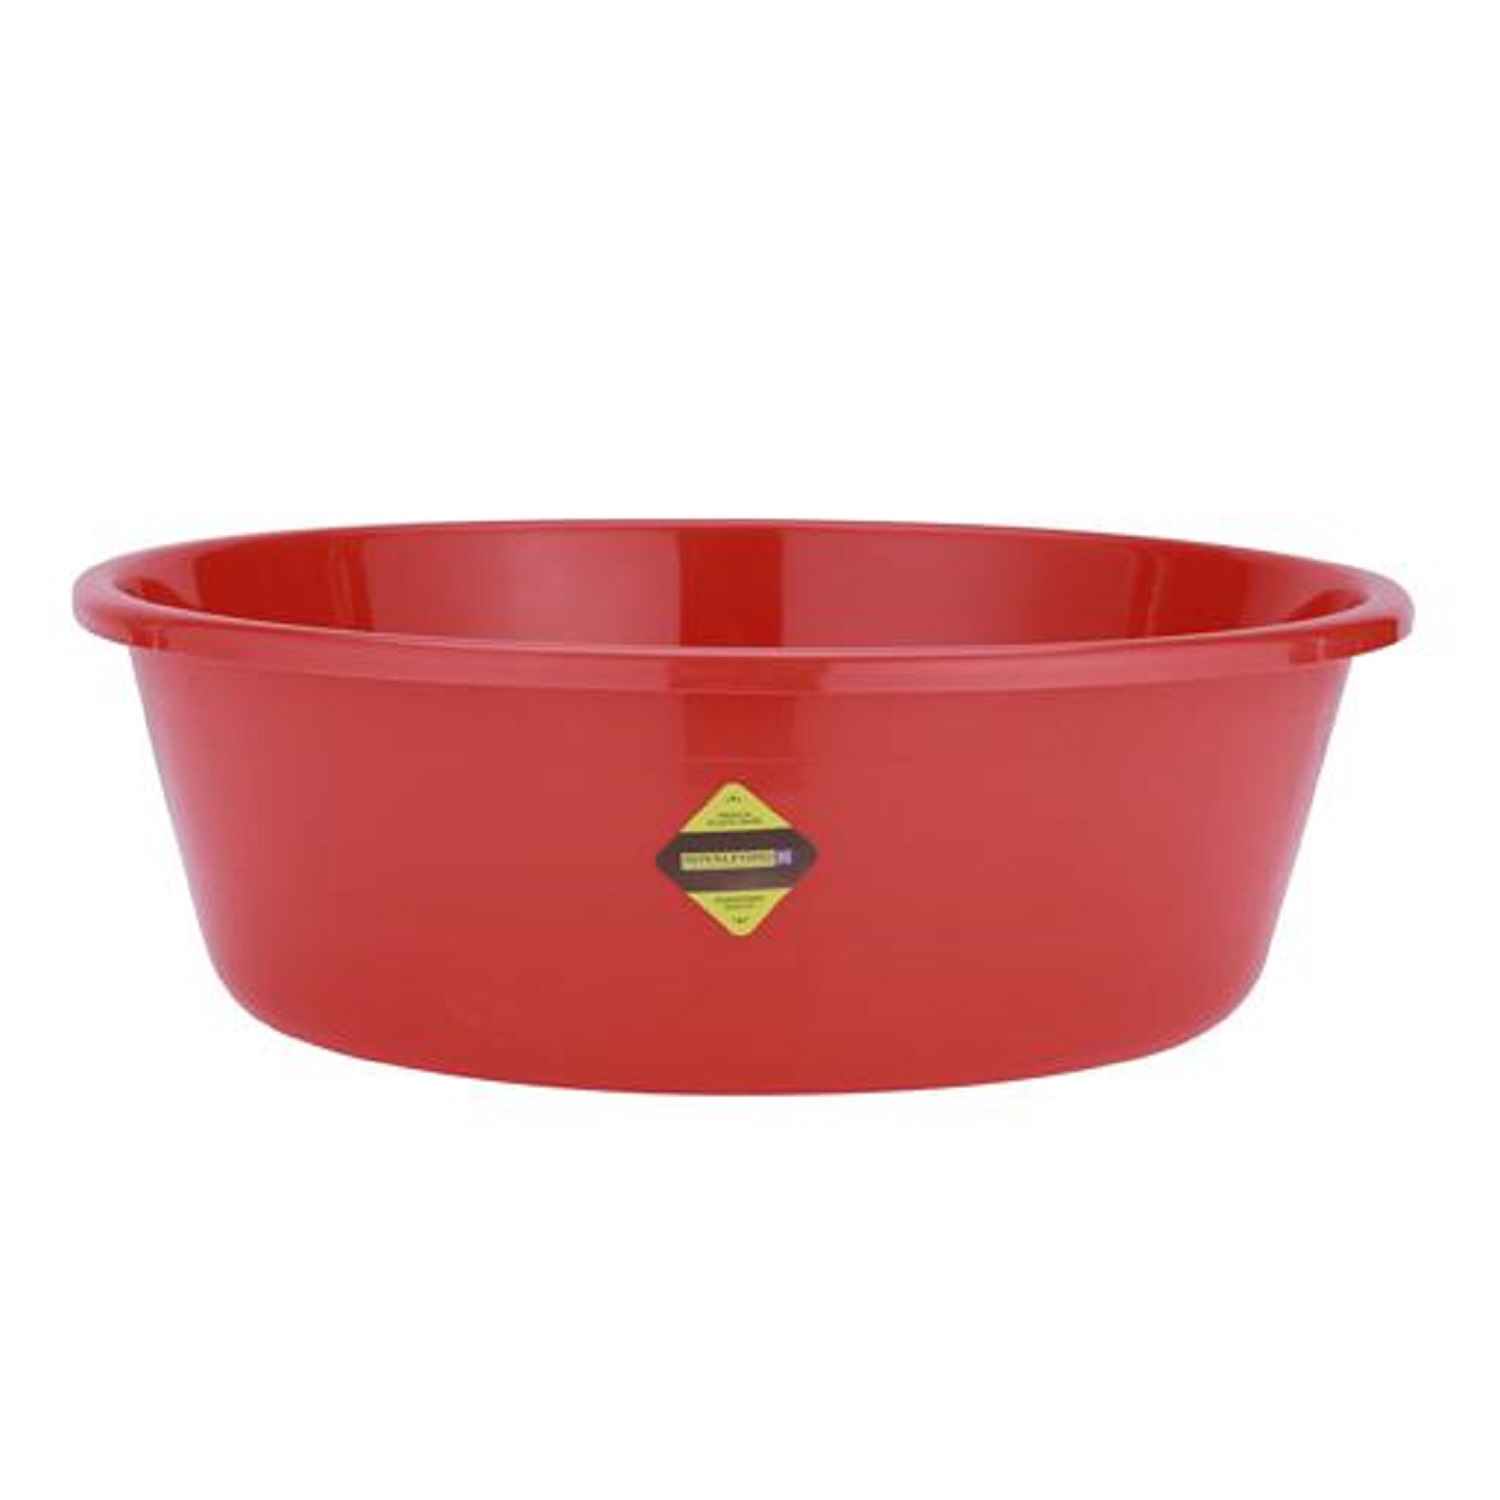 Royalford Tub With Ring - Plastic - Red - 17 LITER